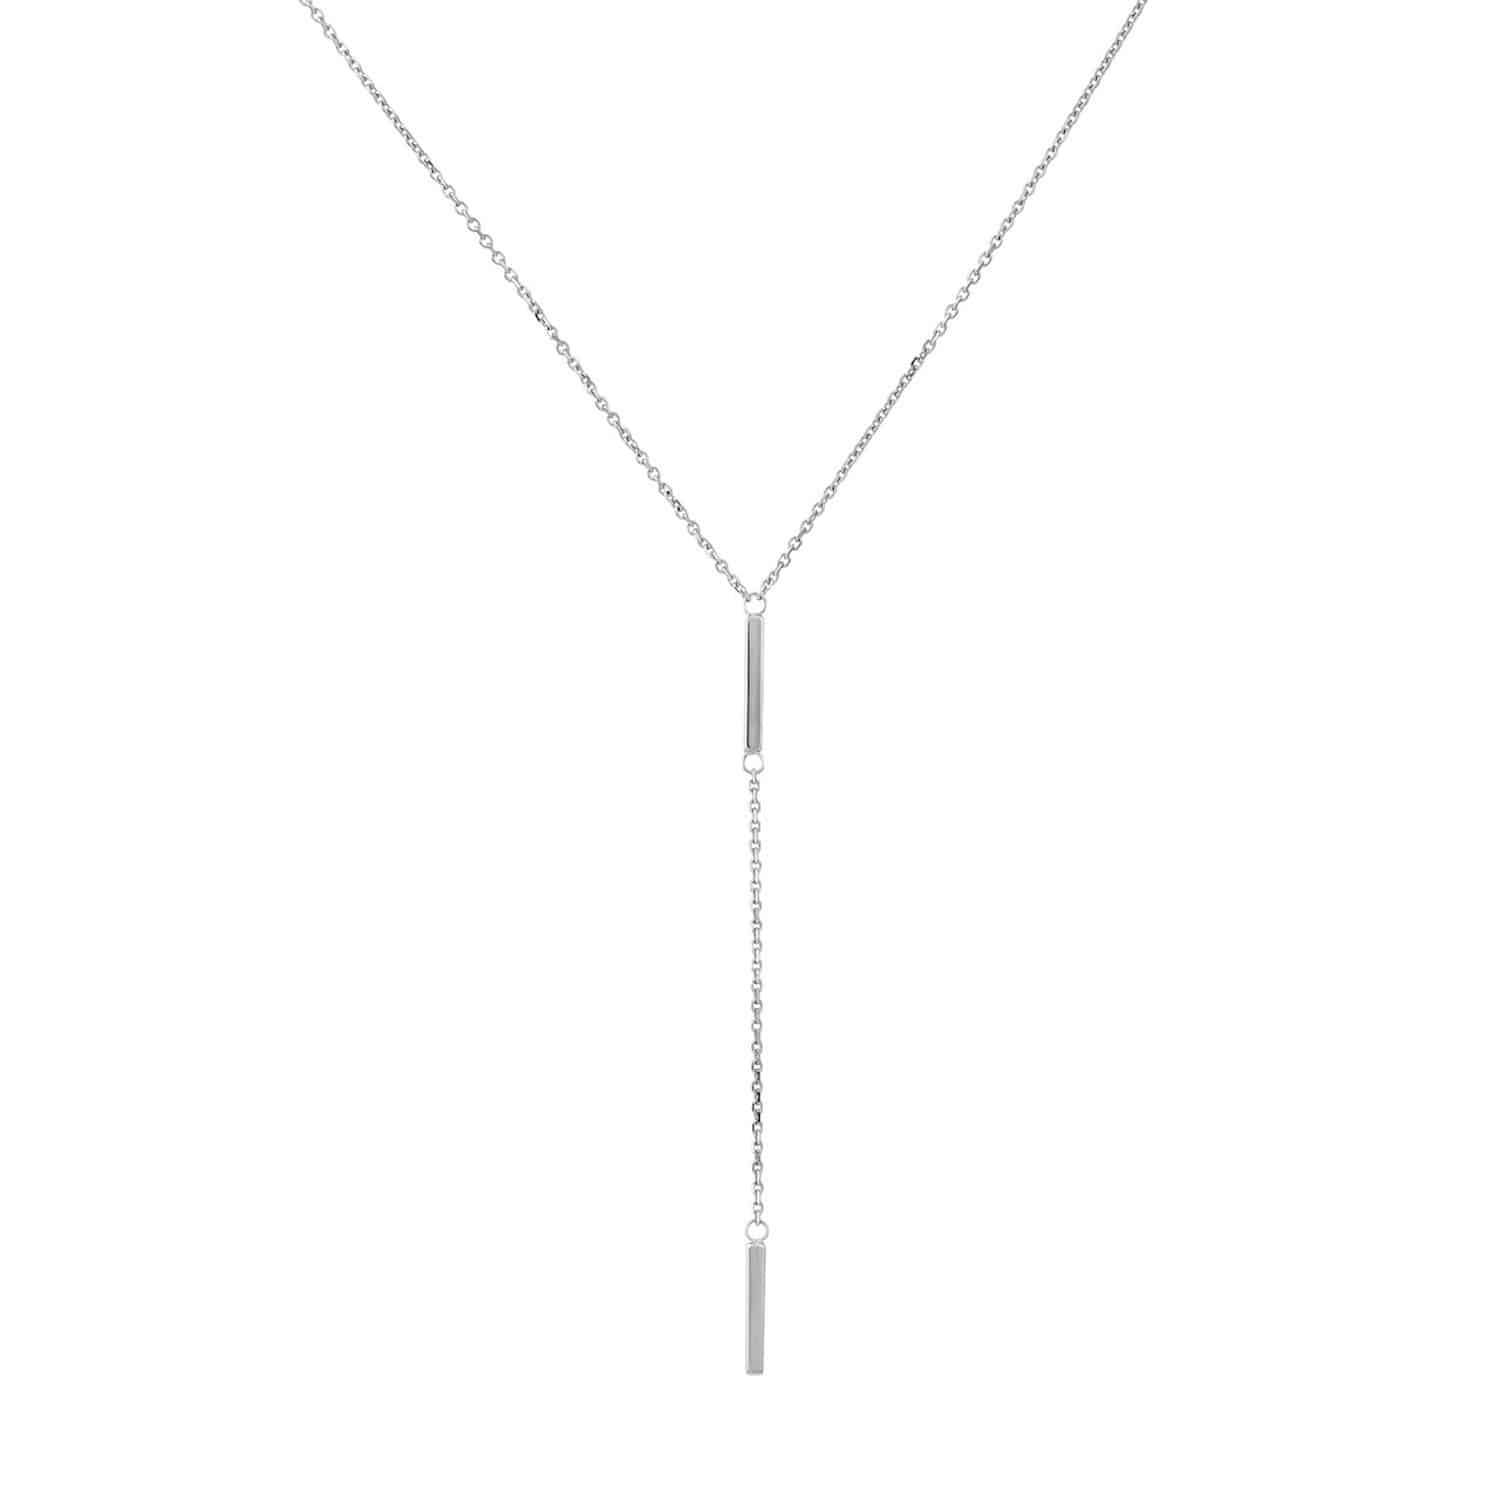 14K Yellow Gold Double 2-Bar Pendant Lariat Chain Necklace 16"- 18" Adjustable - White Gold